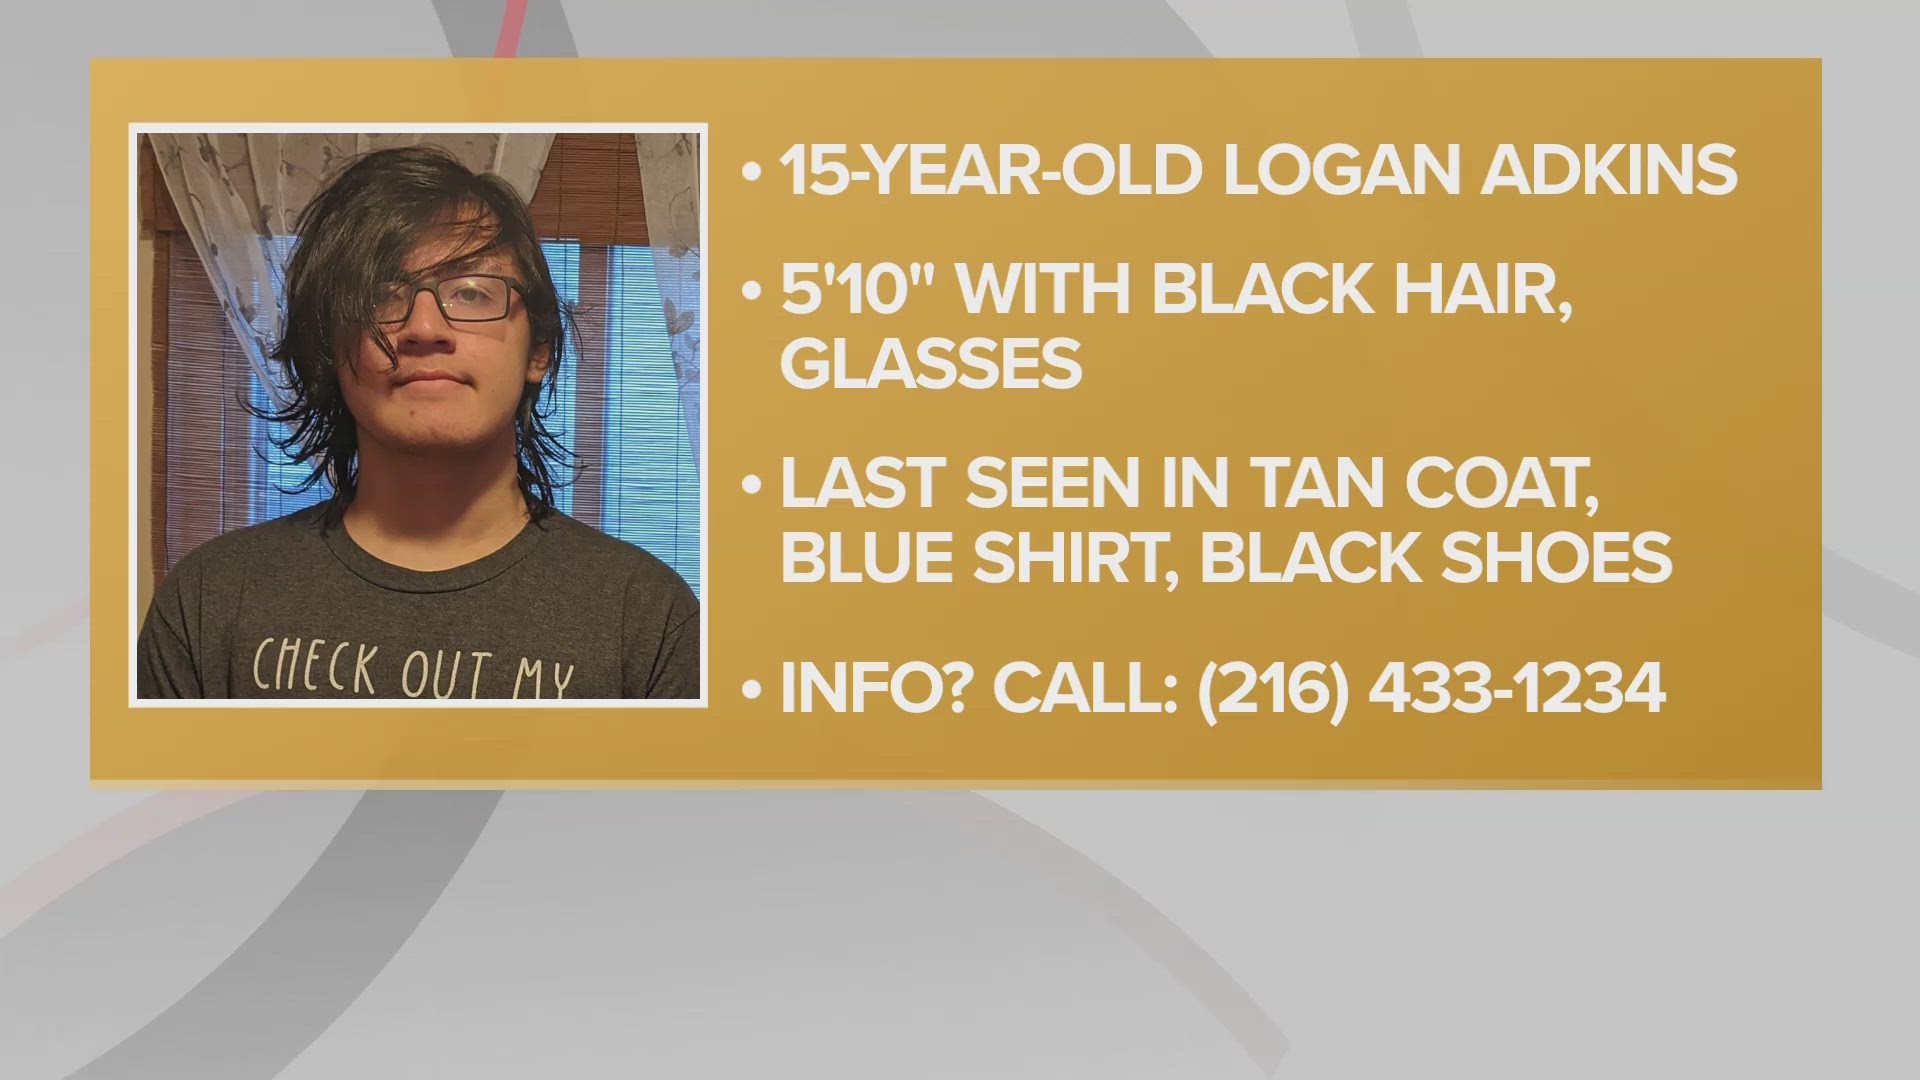 Monday morning, 15-year-old Logan Adkins left his home for school but was not seen on school grounds.